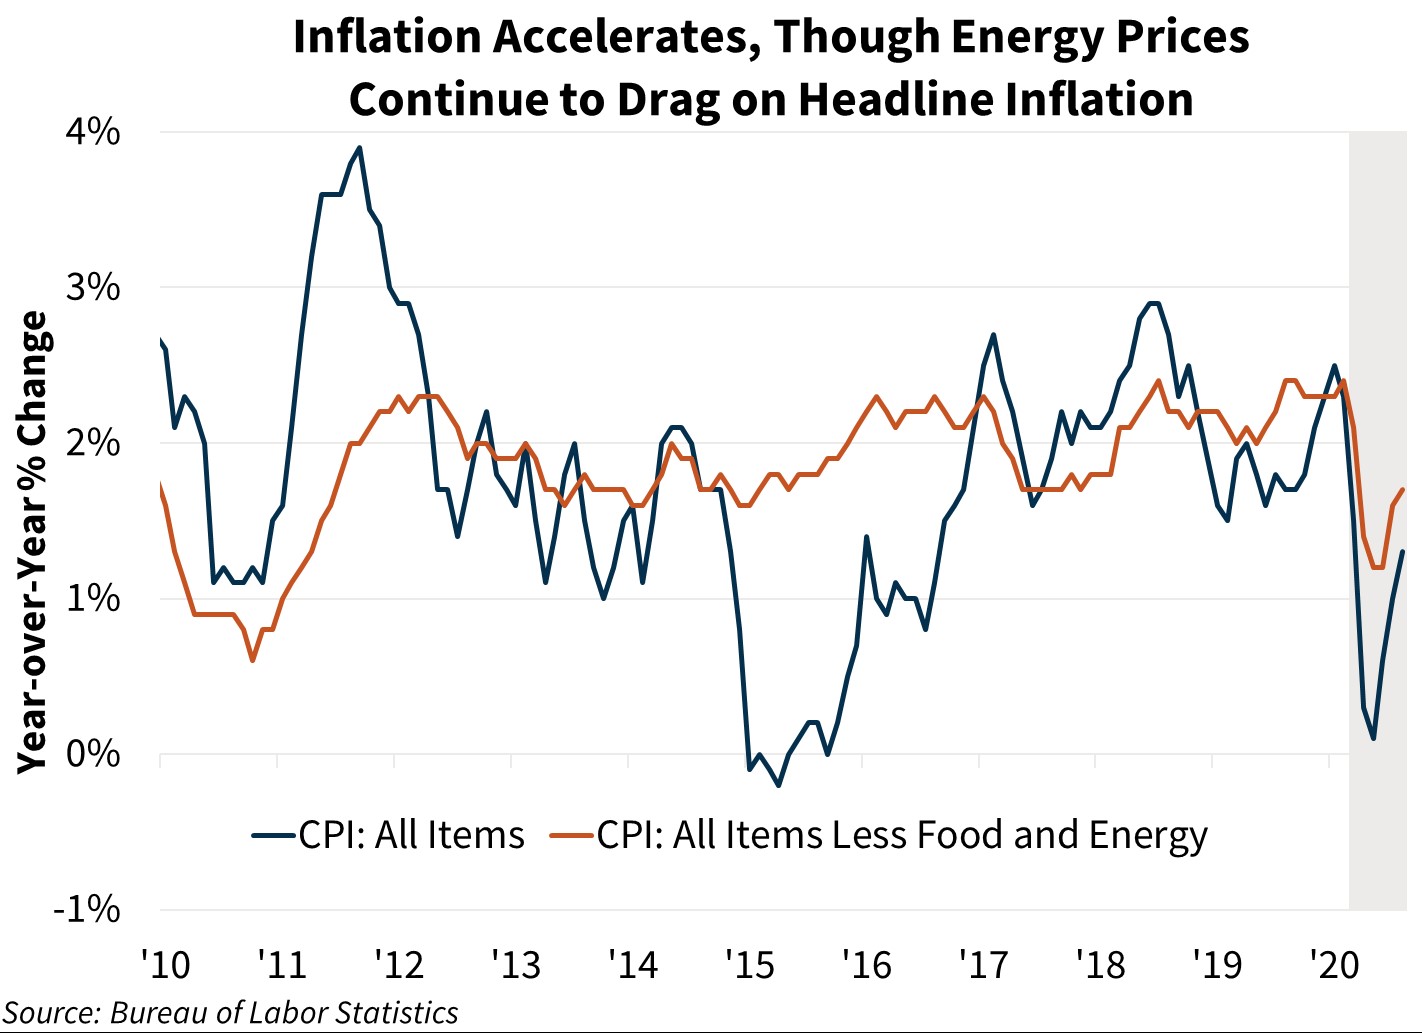 Inflation Accelerates Though Energy Prices Continue to Drag on Headline Inflation